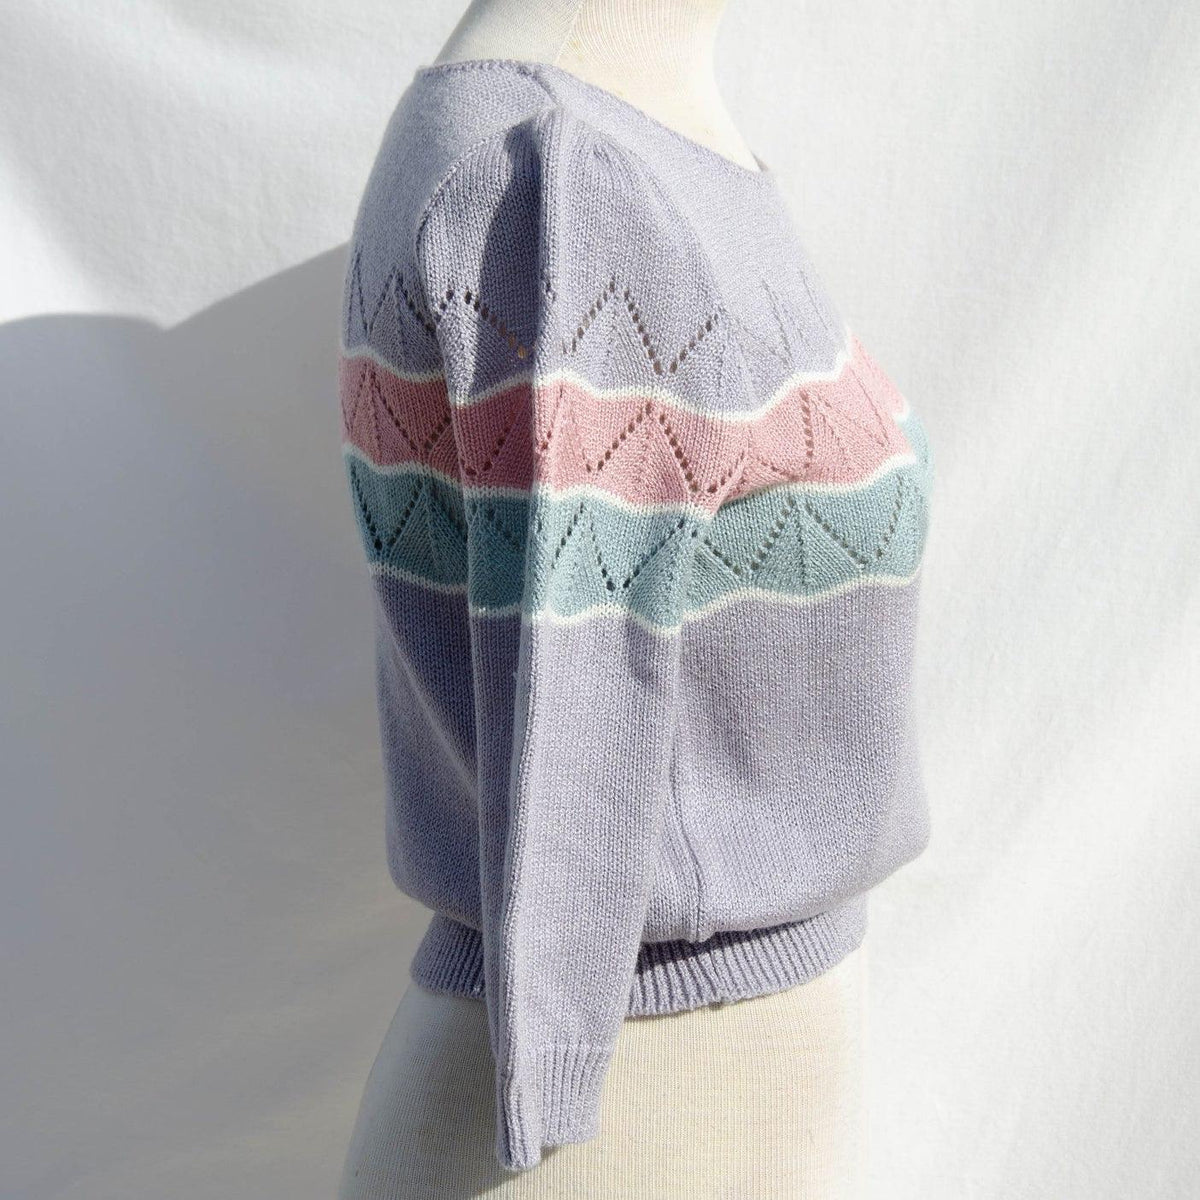 COLLEGE TOWN Vintage 80's Pastel Striped Sweater | Size S-M - theREMODA